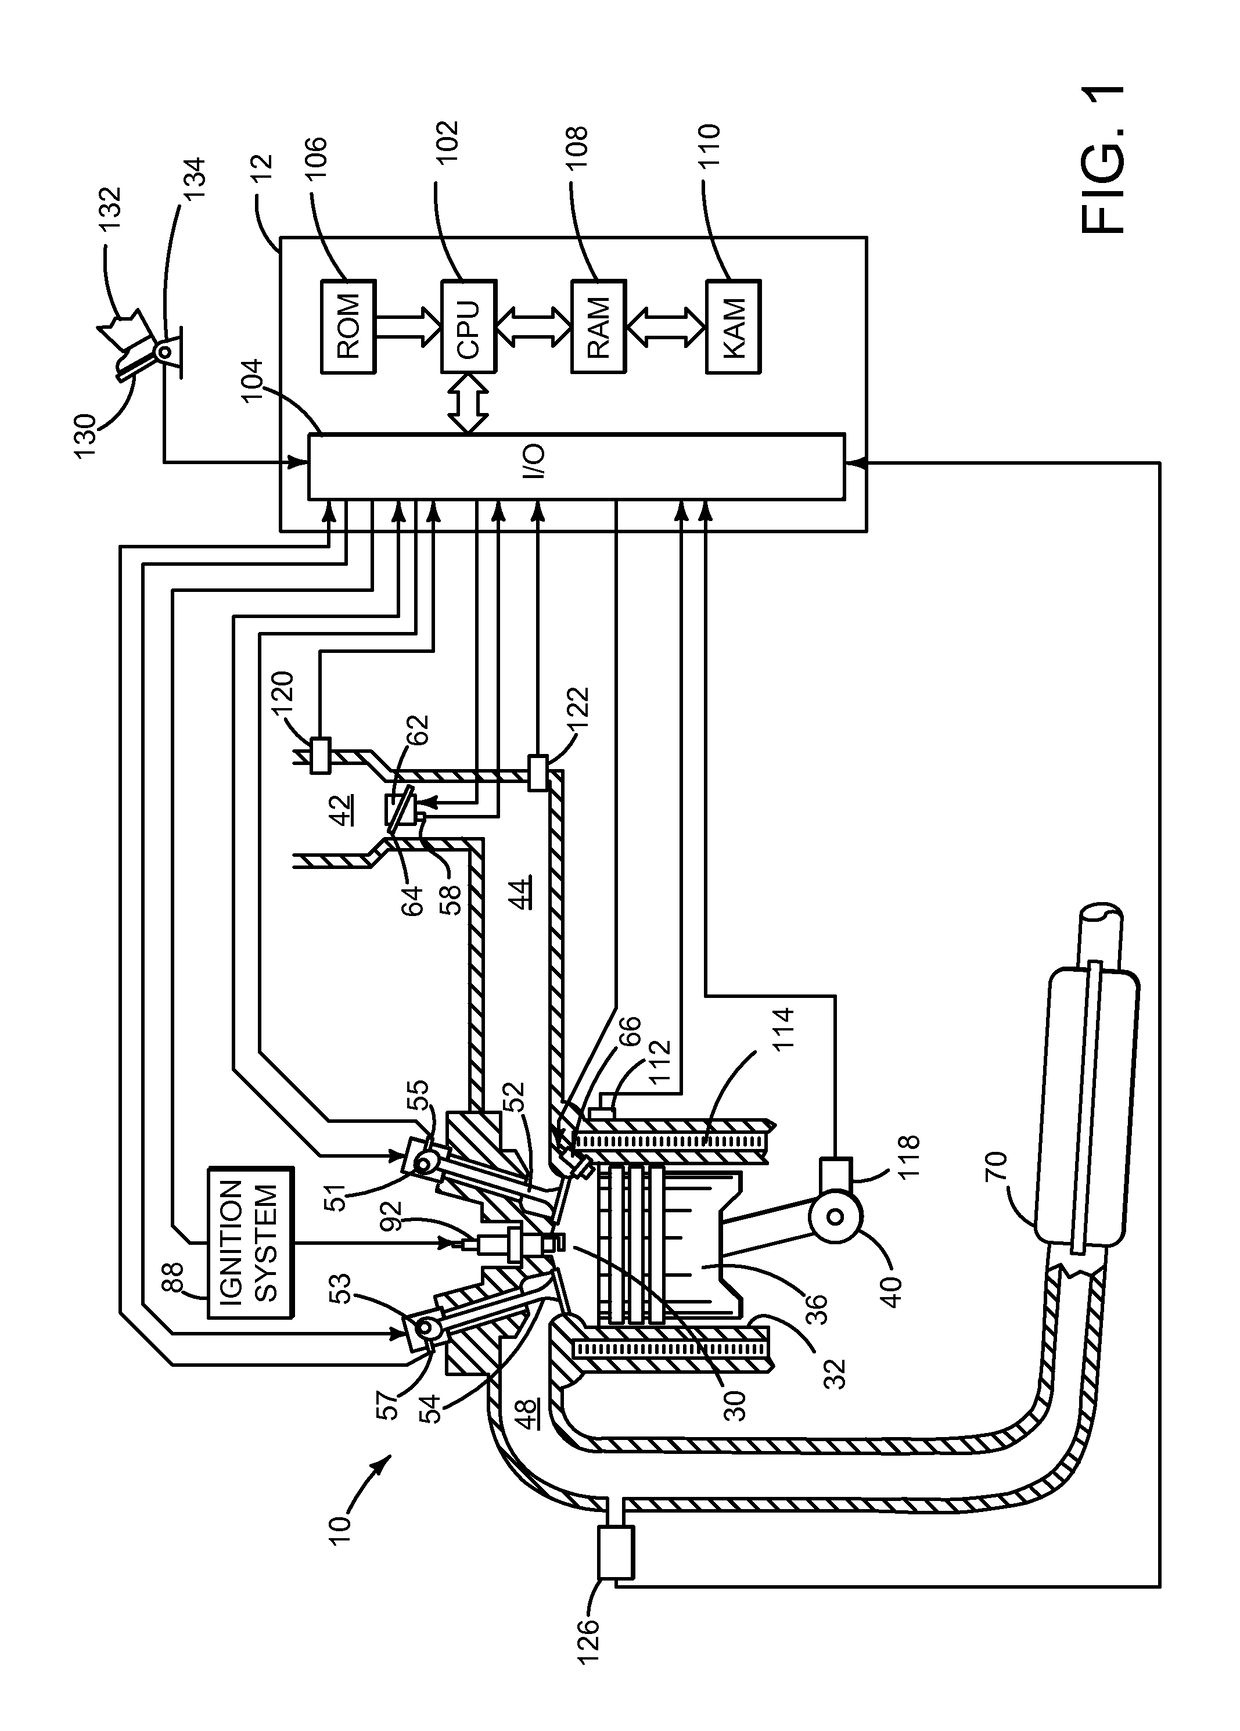 System and method for operating an ignition system